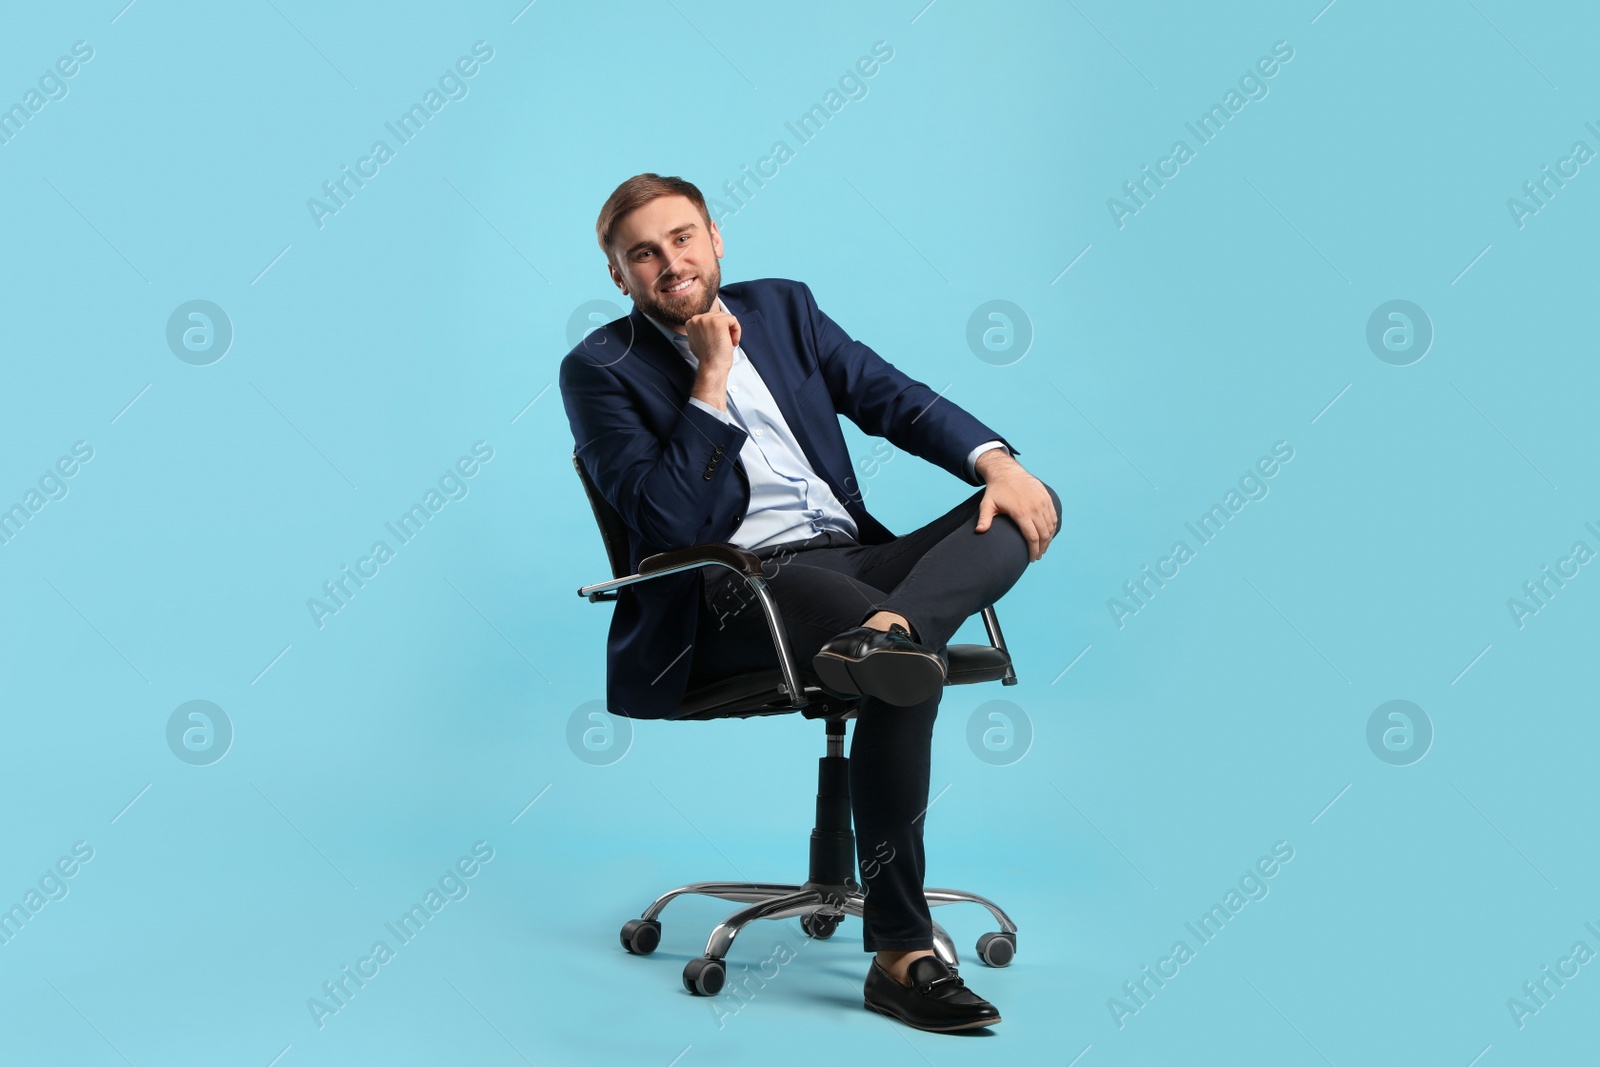 Photo of Young businessman sitting in comfortable office chair on turquoise background